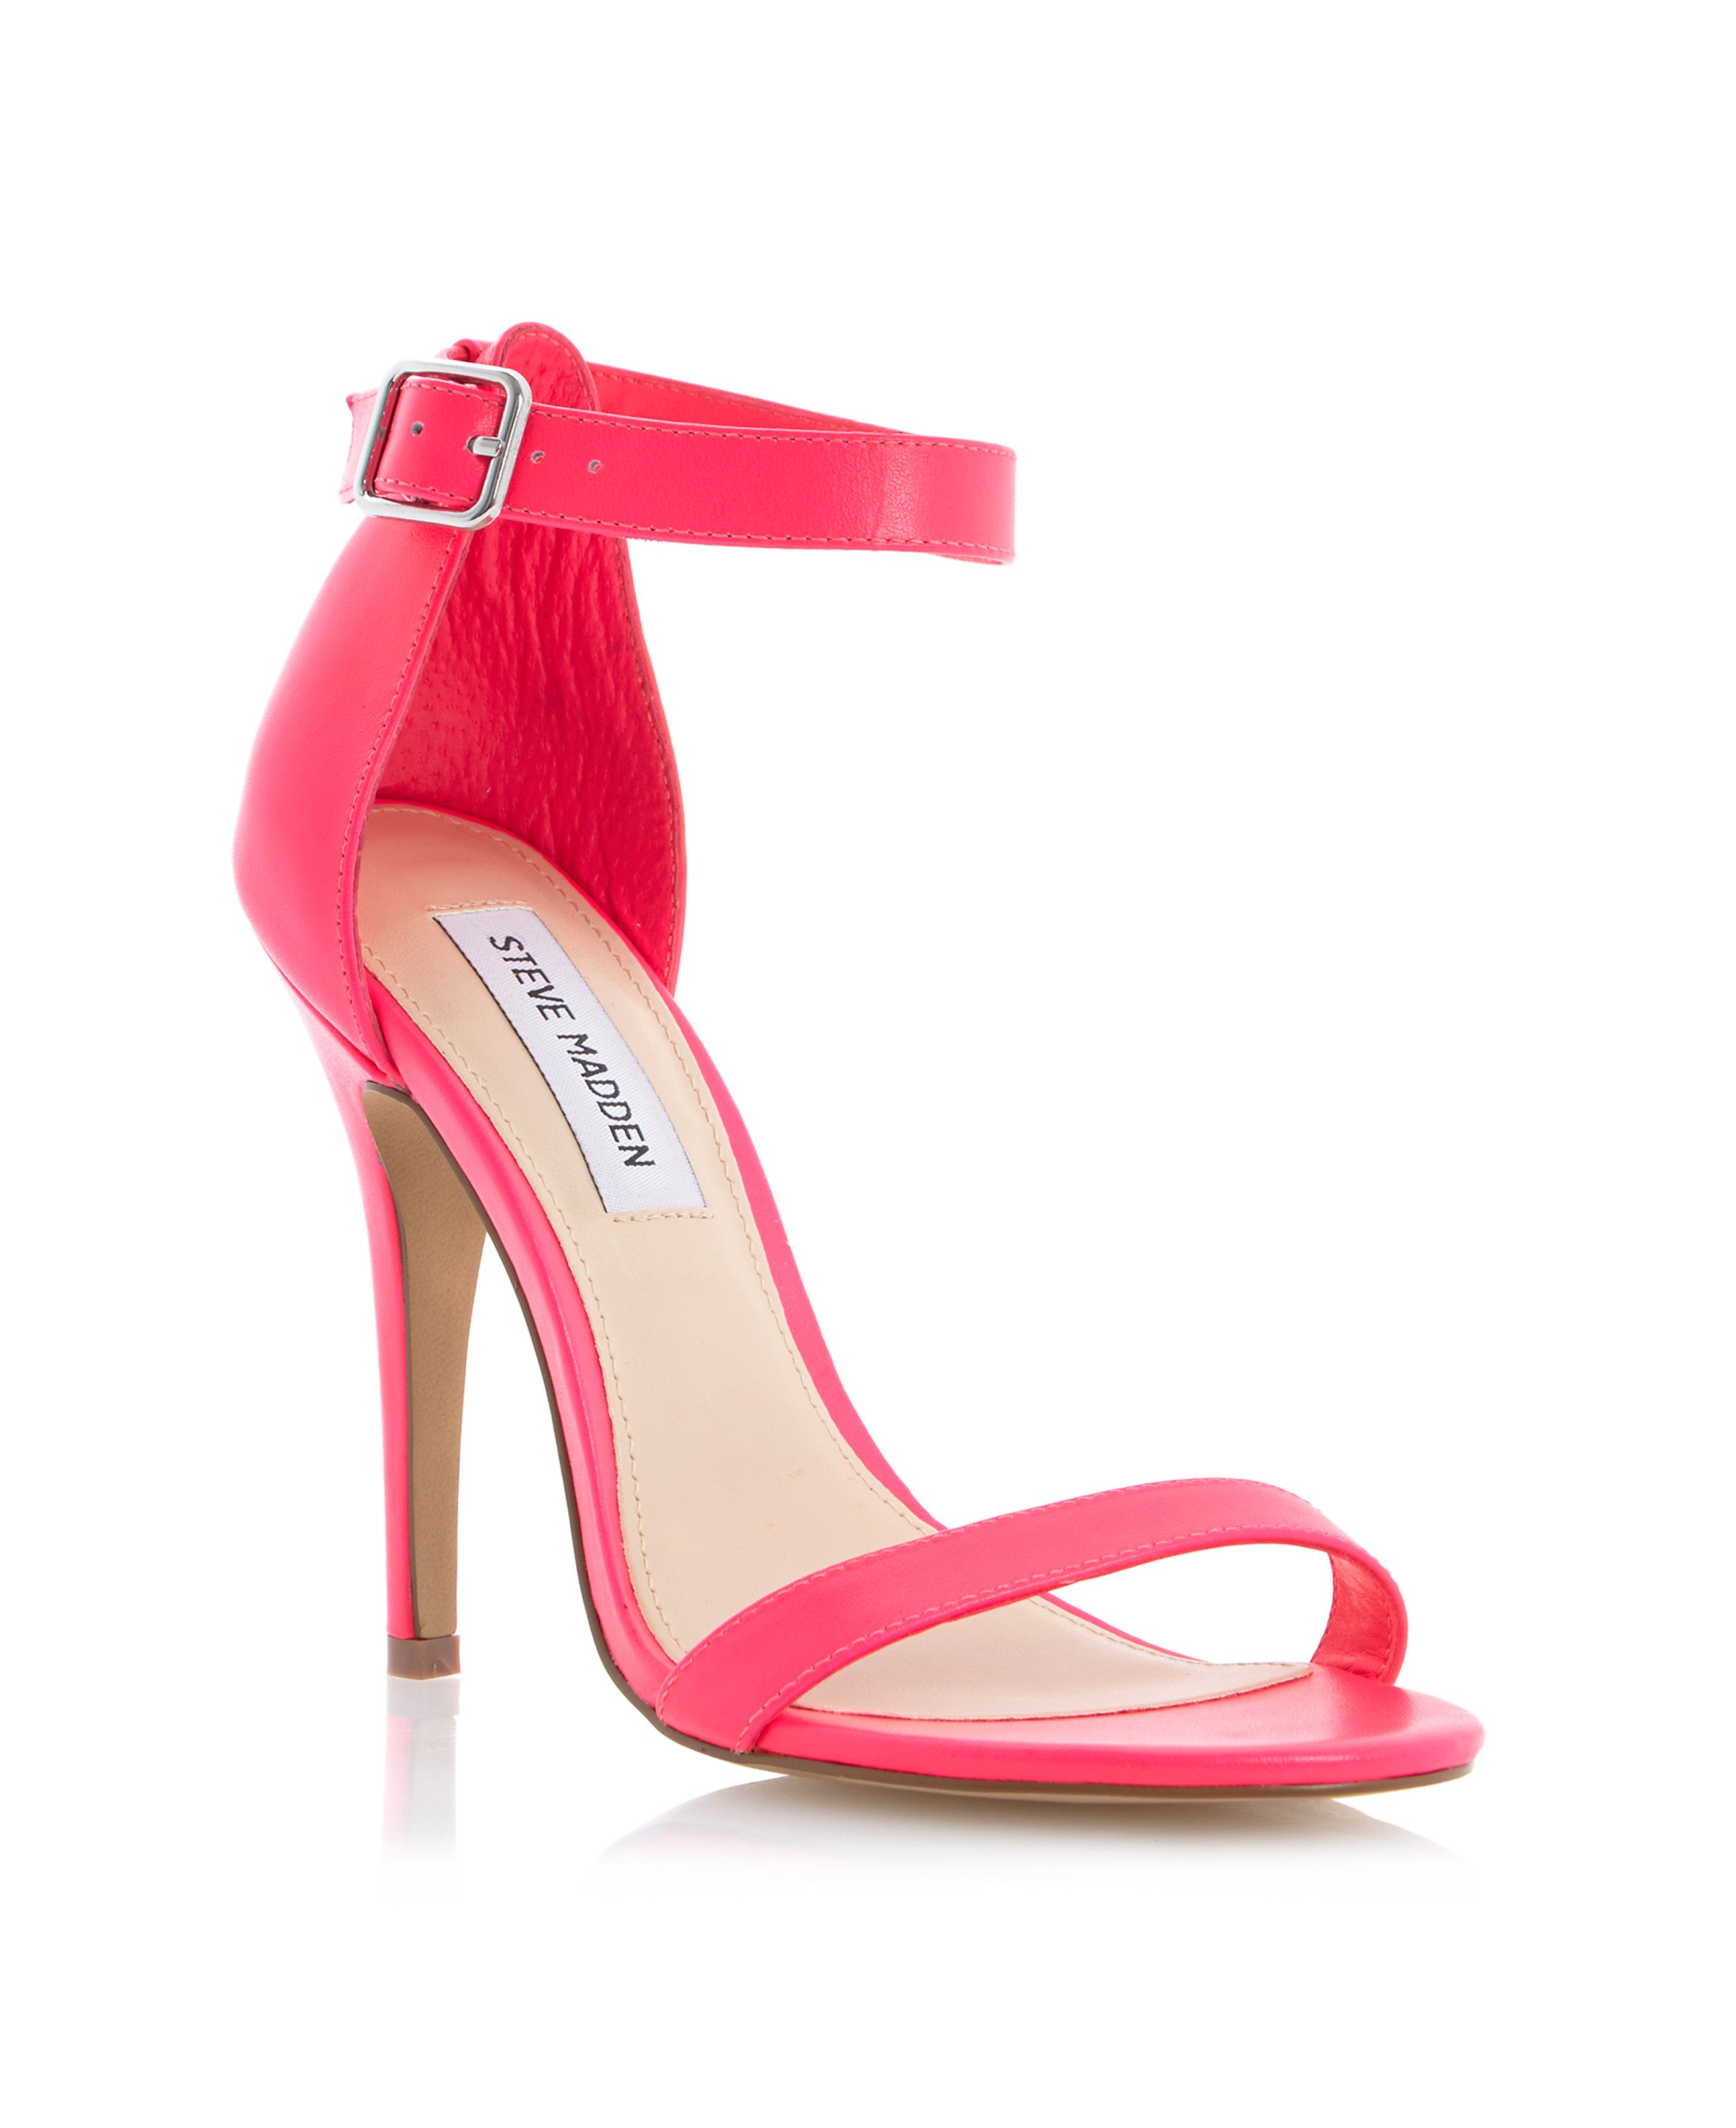 Steve Madden Realovepatent Single Sole Sandals in Pink | Lyst